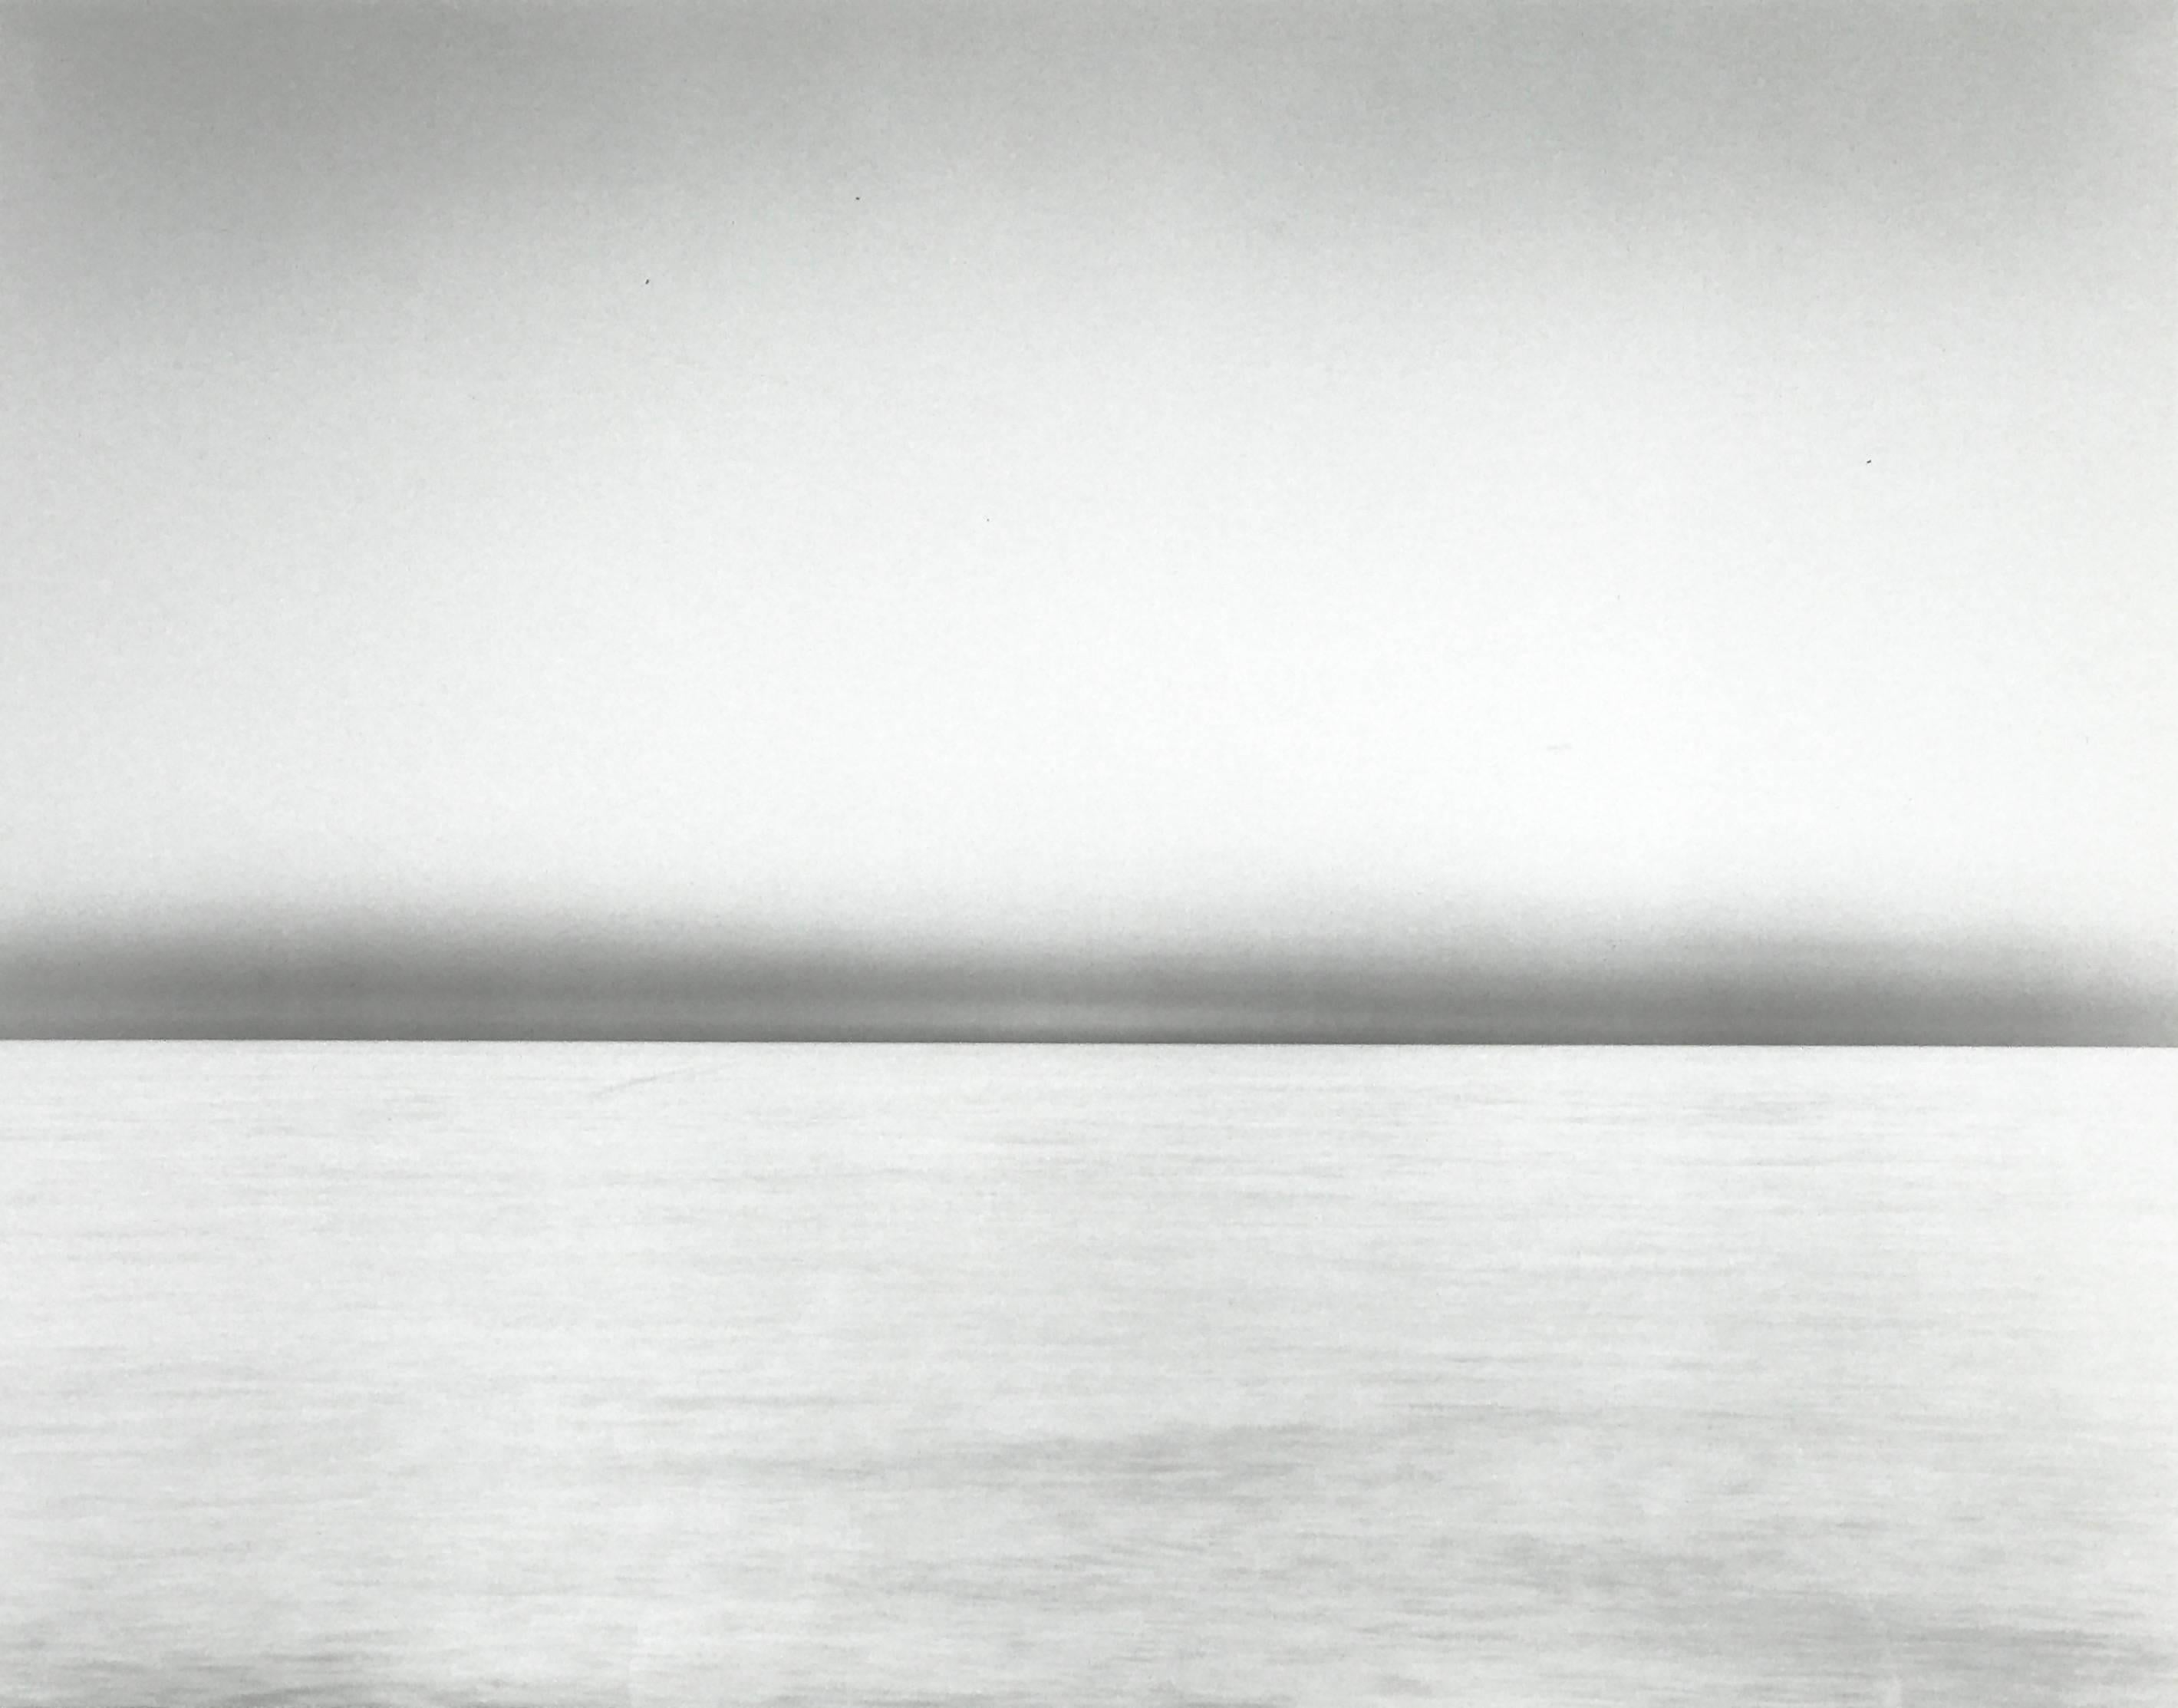 A signed, dated and numbered silver gelatin print titled “Captiva Island, Florida” by American photographer Chip Hooper (1962–2016).

A serenely contemplative black-and-white work exemplifying the deeply emotional undercurrent of seascape-focused